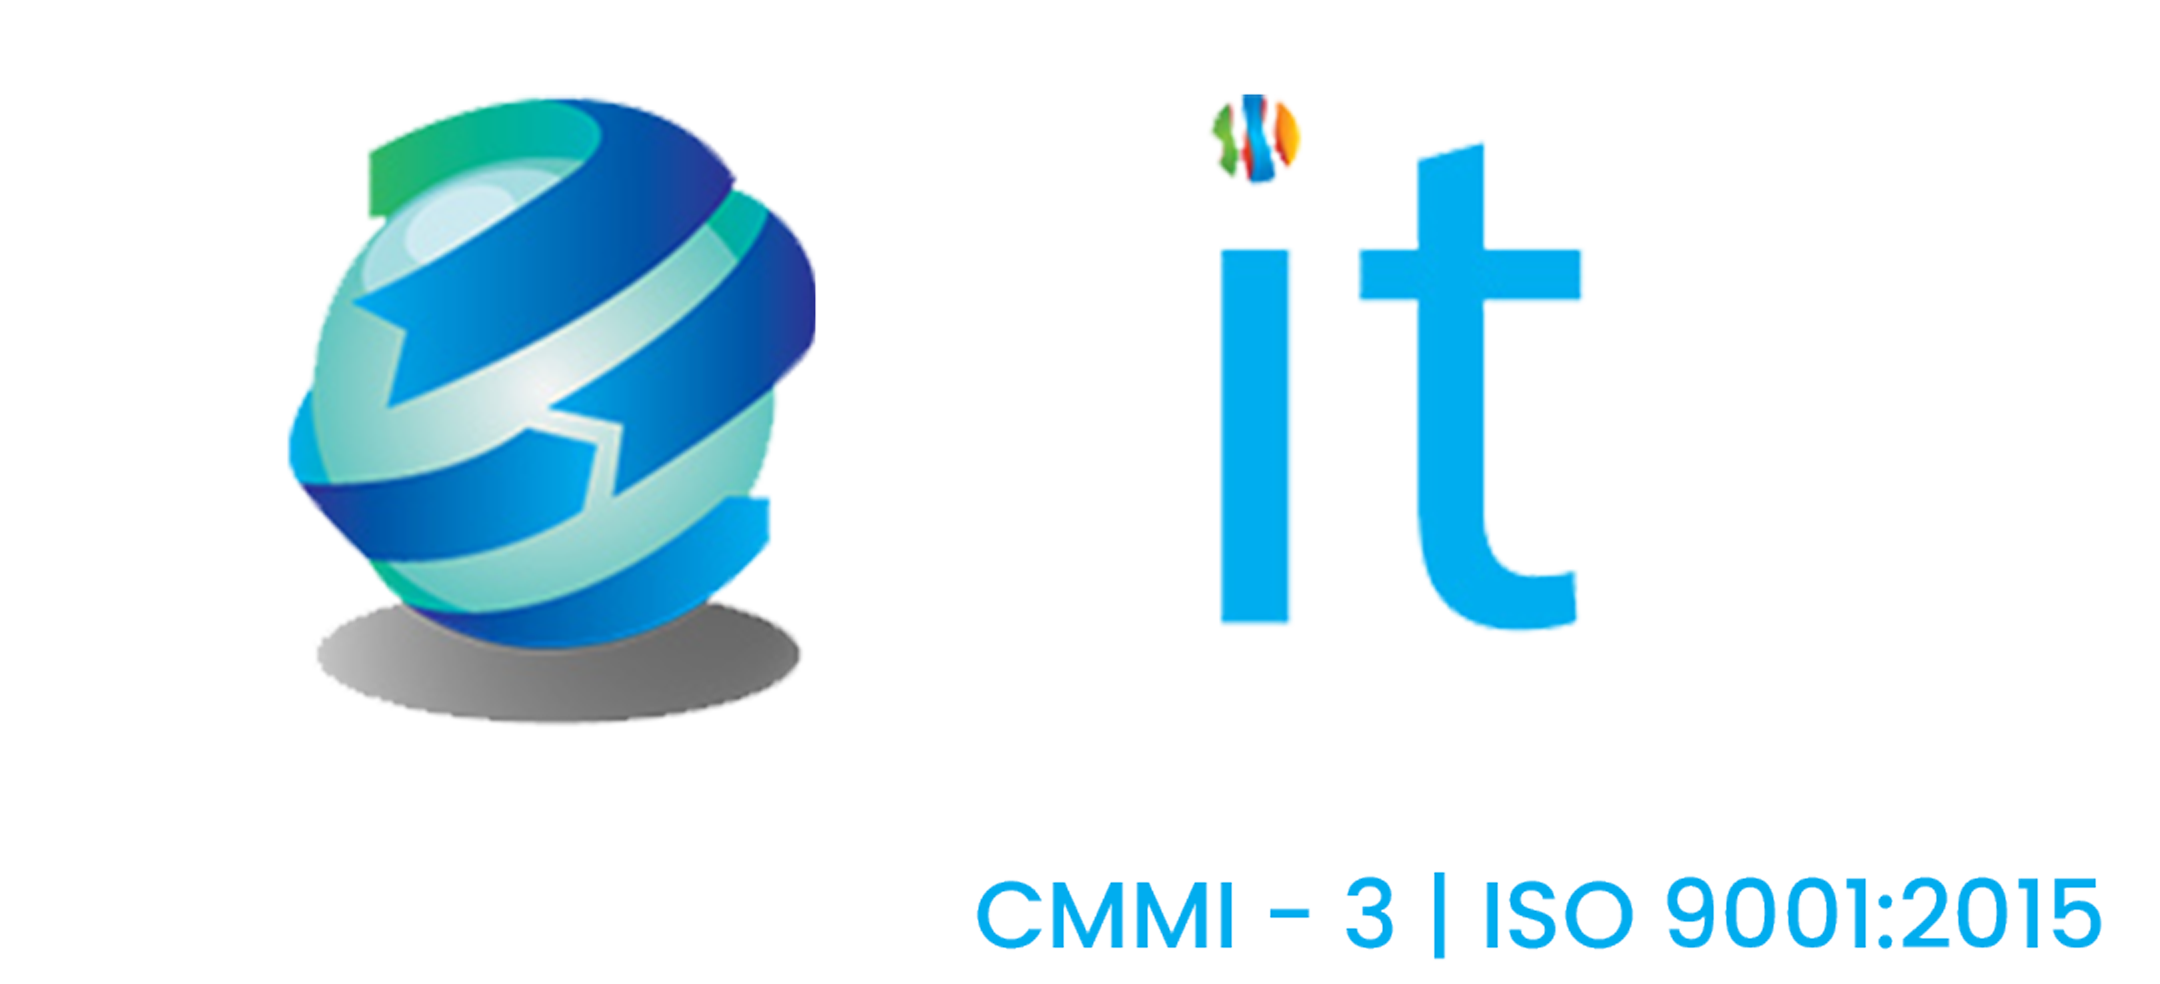 Aculance-saas-software-solutions-logo